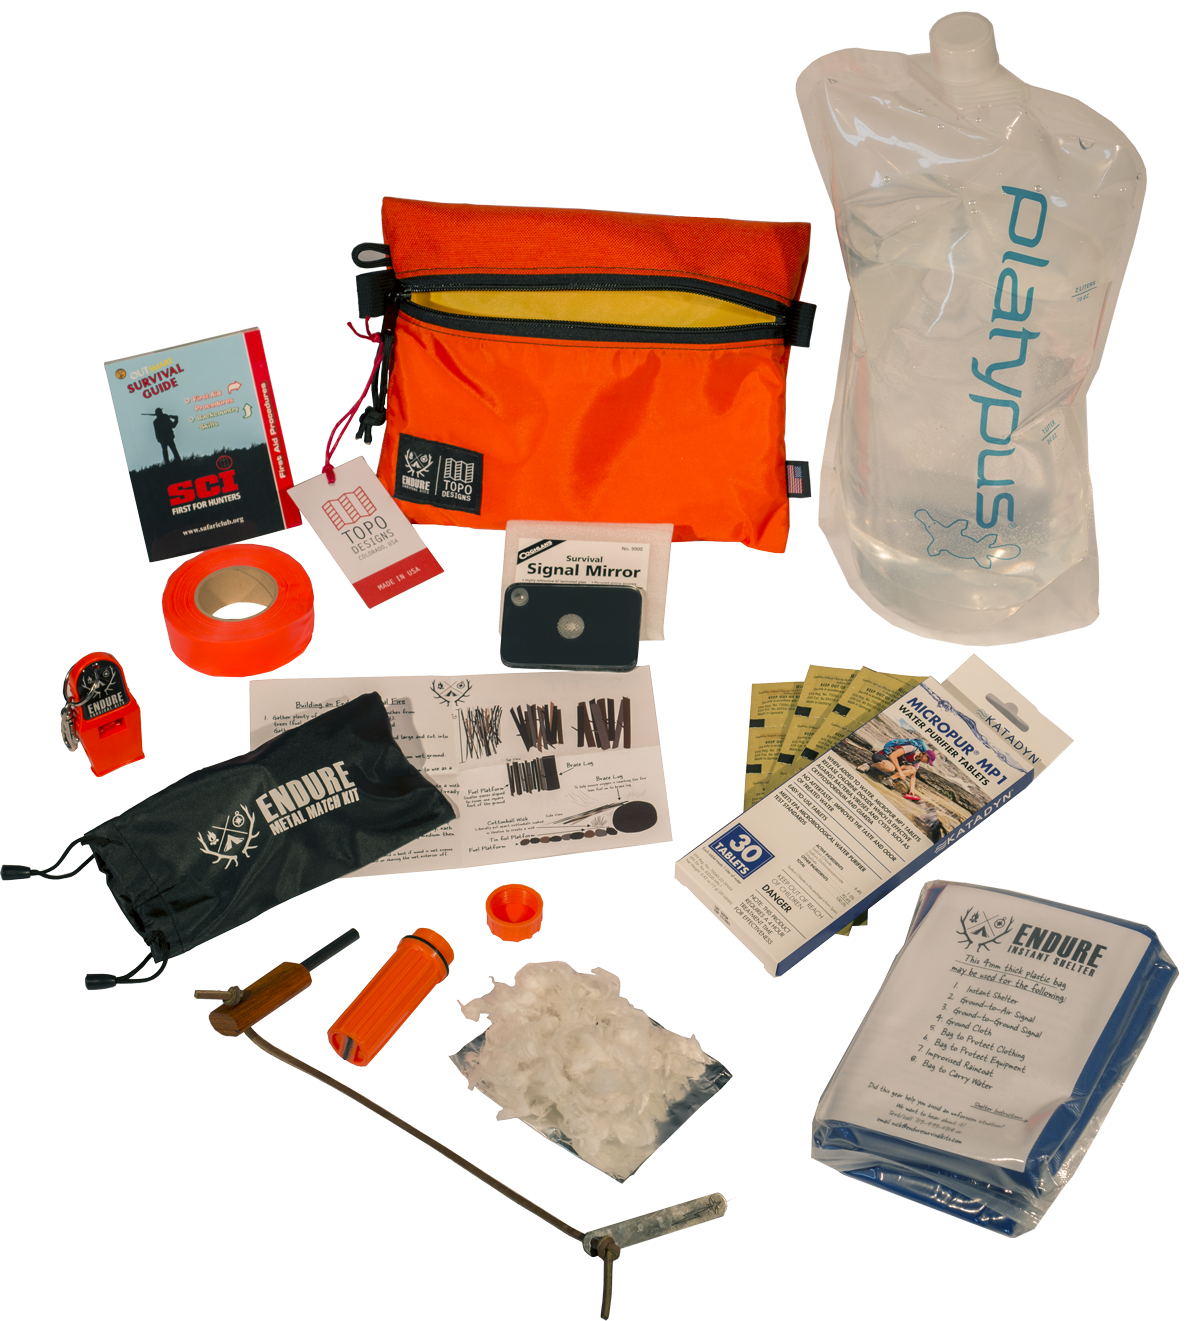 WAZOO Survival Gear Everyday Essentials Kit, 15 Tool Survival kit,  Backpacking Kit, Camping Multi Tool kit, Made in The USA